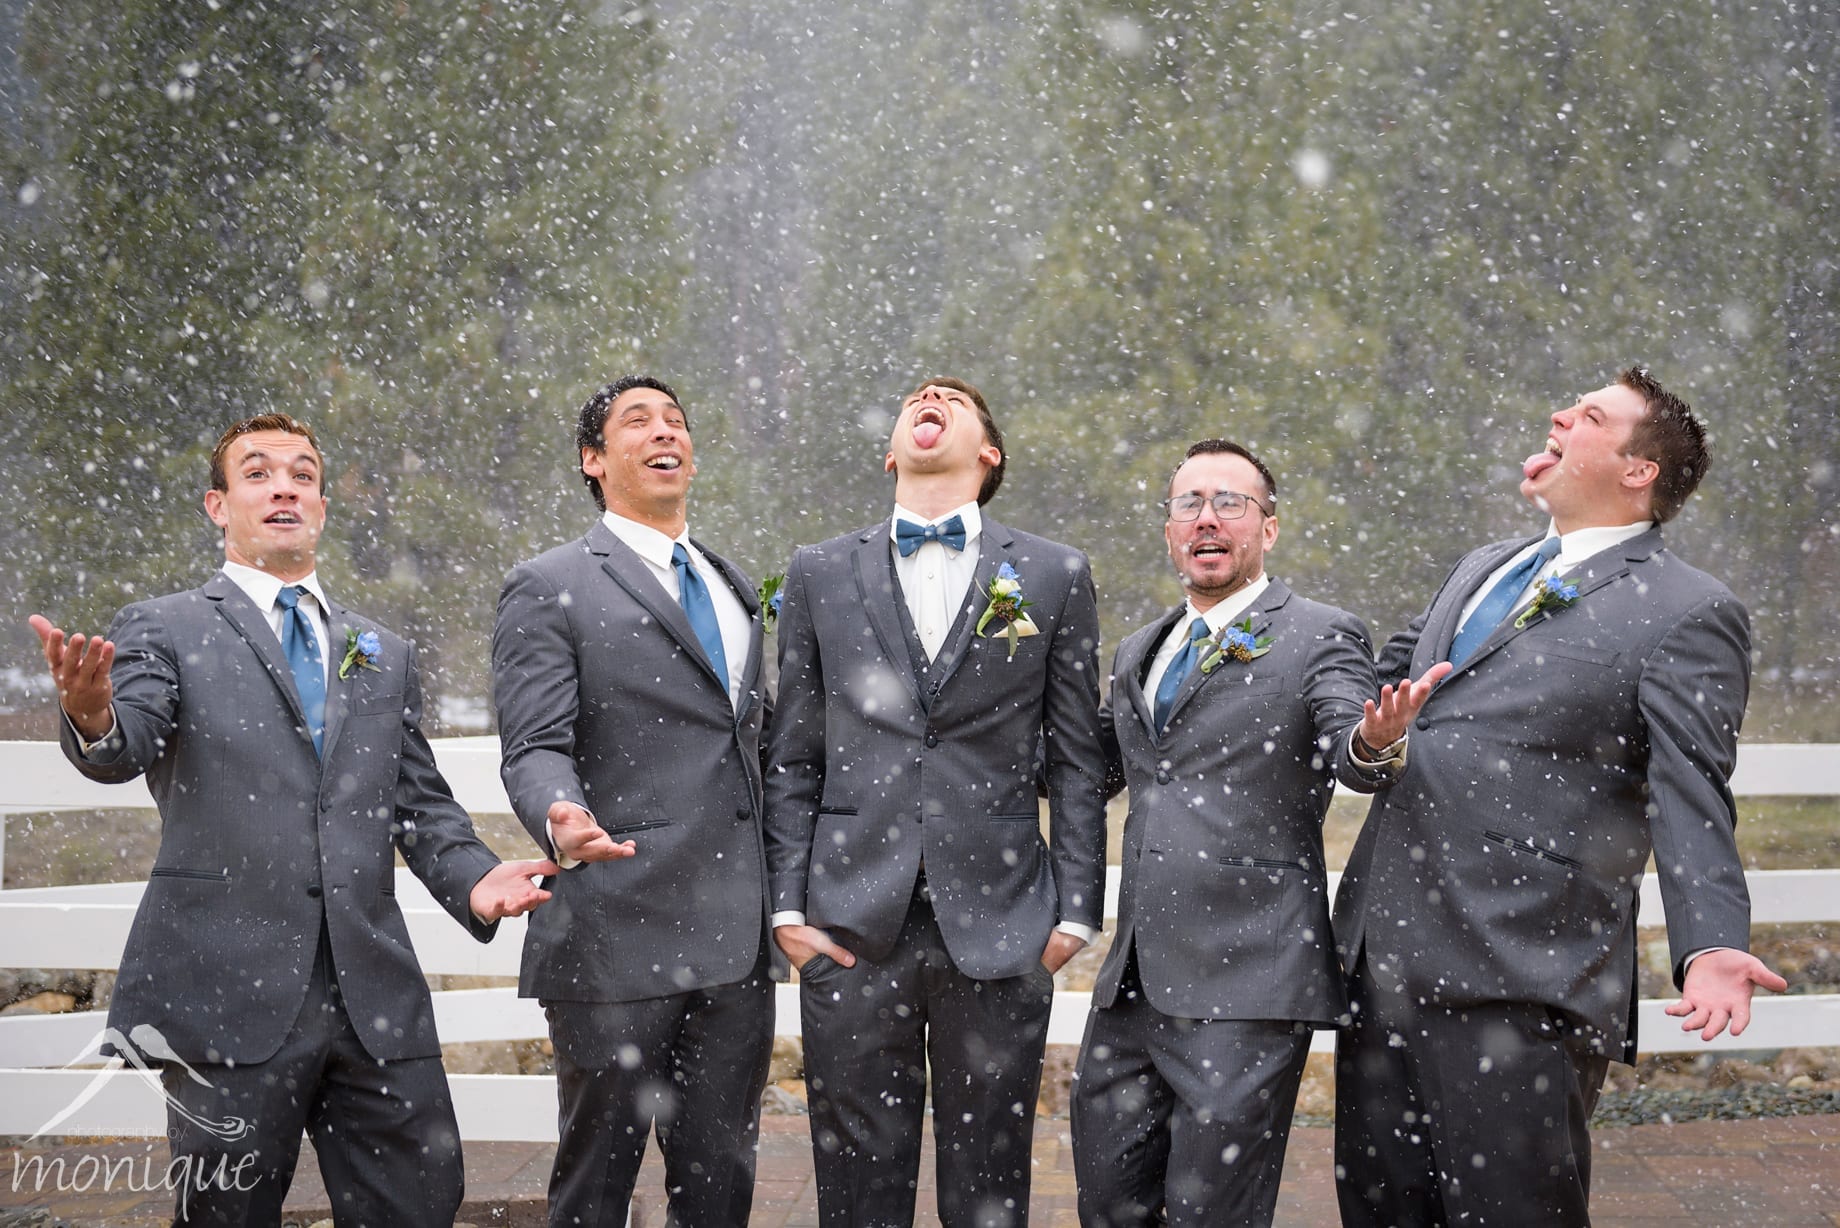 The Corner Barn wedding photography in Graeagle with the groom and groomsmen having fun in the snow storm, photography by Monique, weding photojournalism